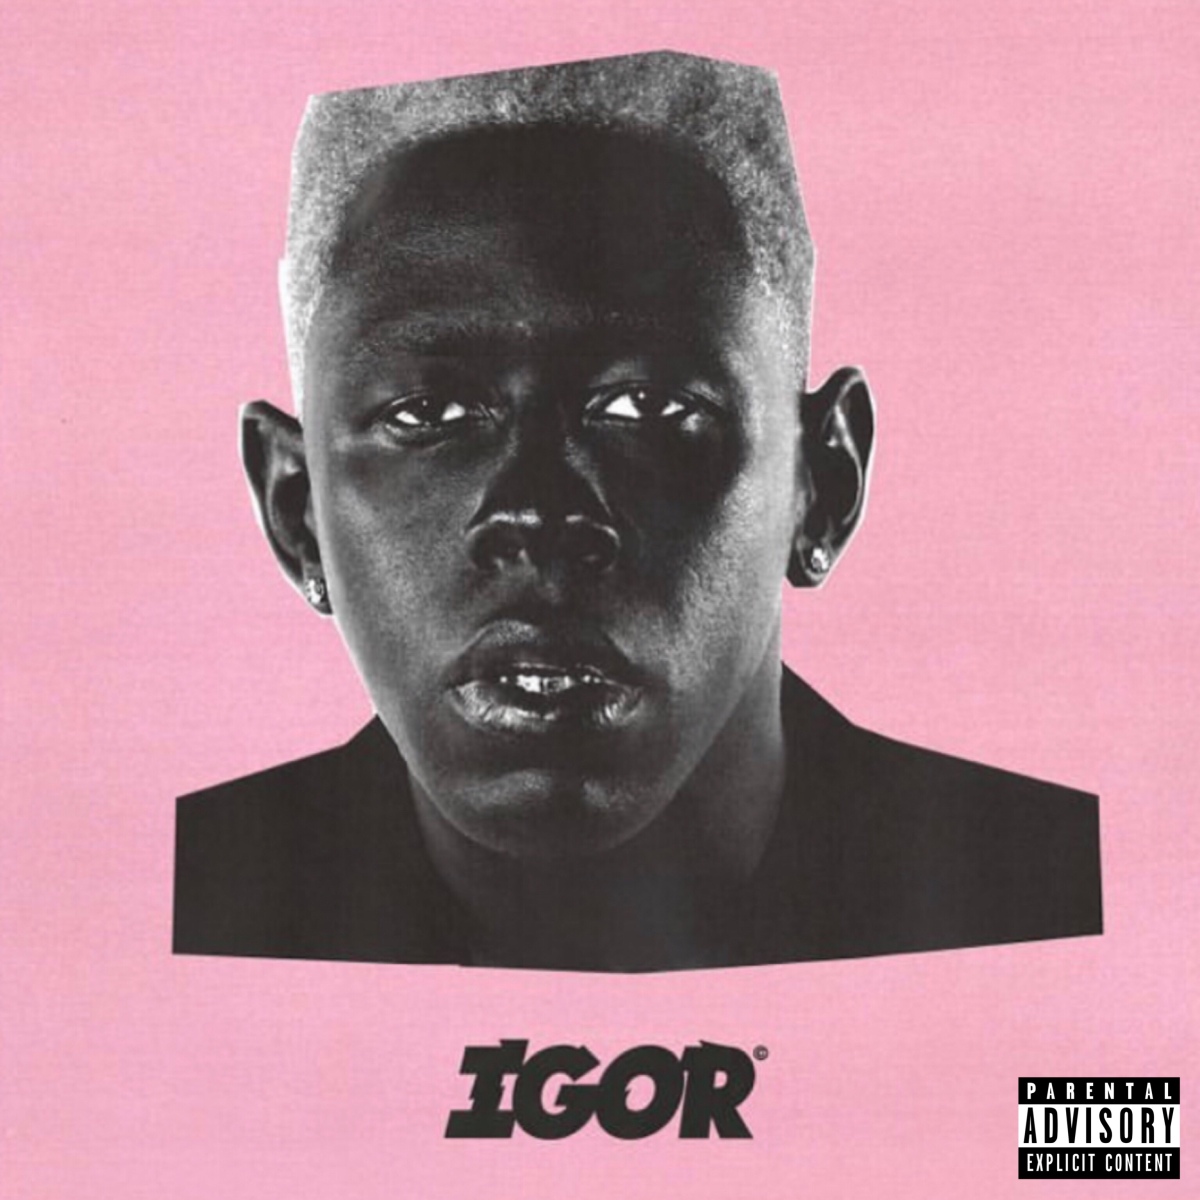 Tyler, The Creator – “IGOR” review – Legends Will Never Die